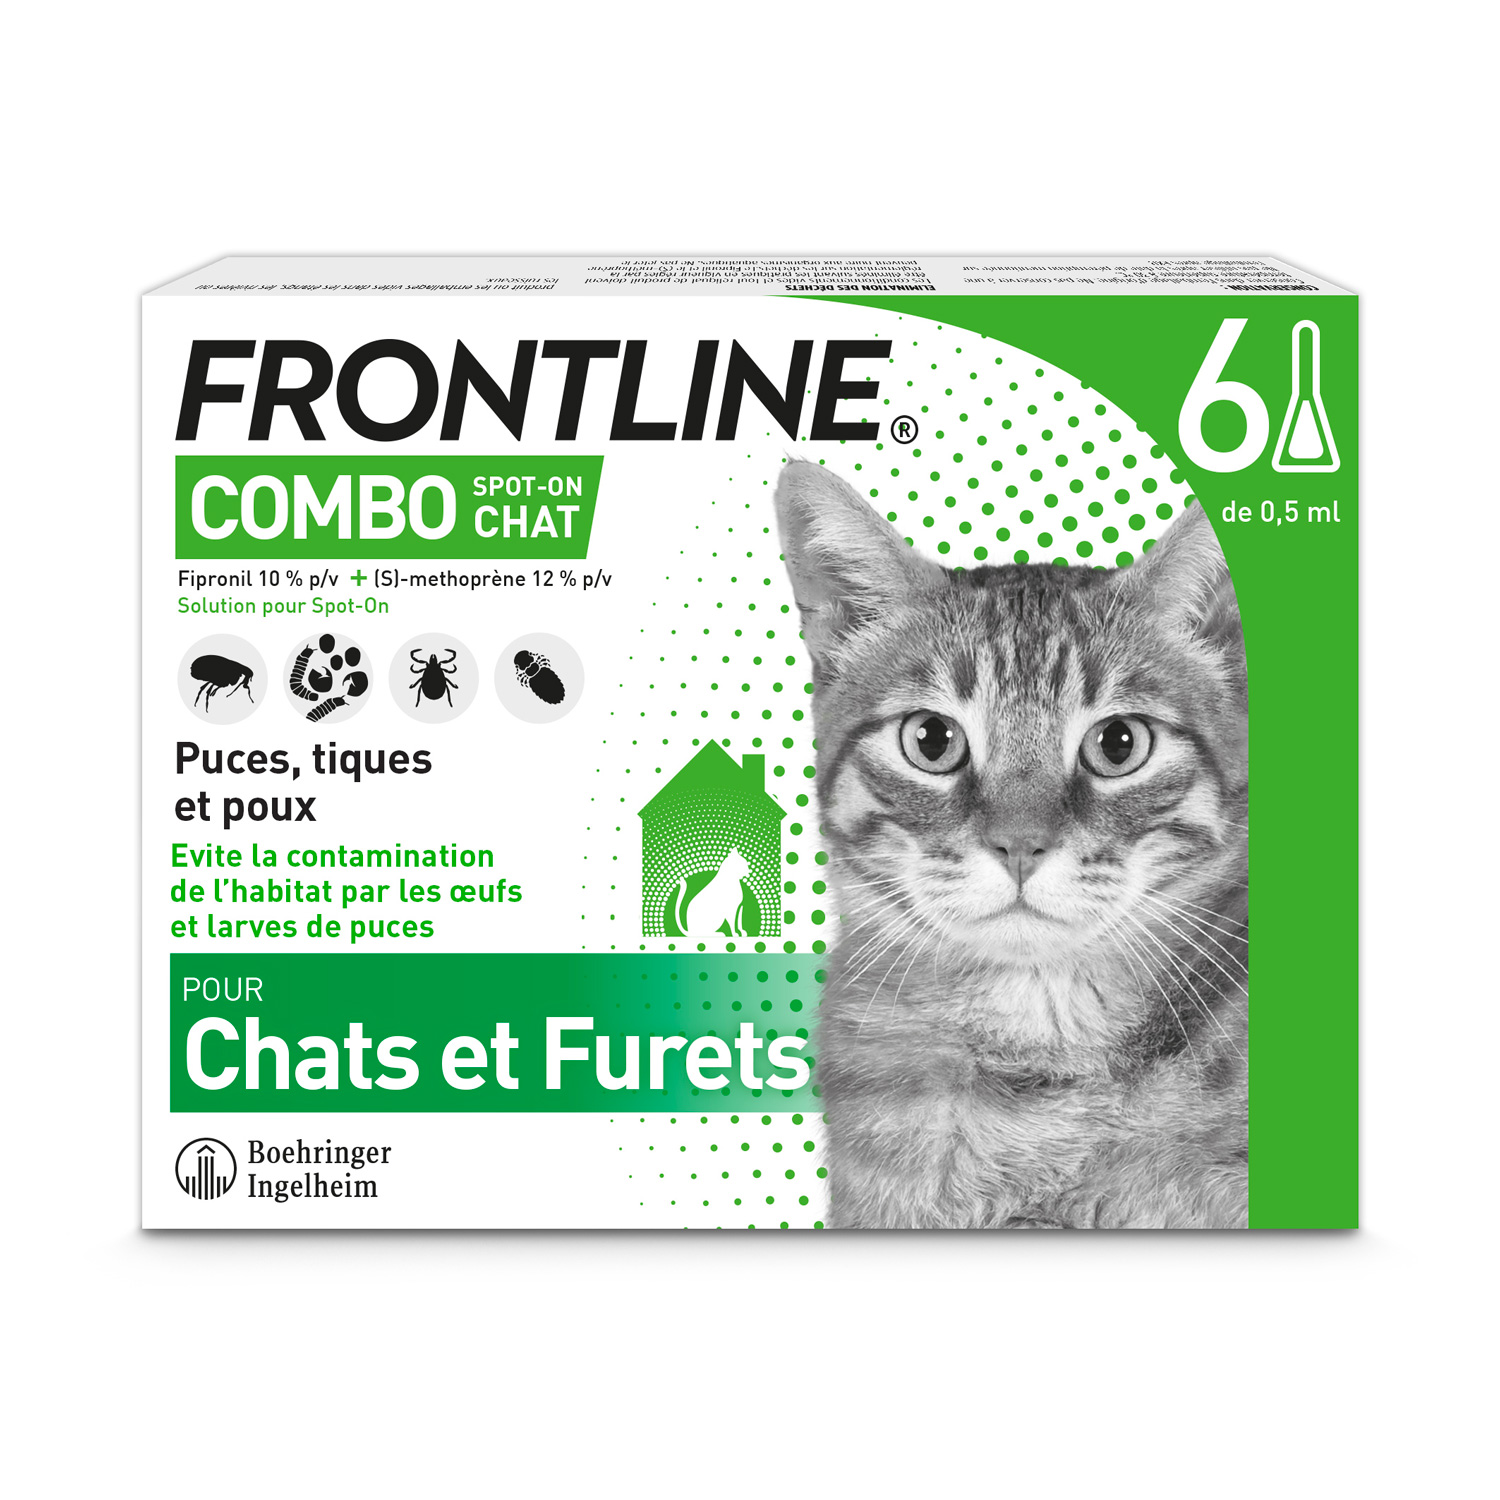 Frontline Combo Chat